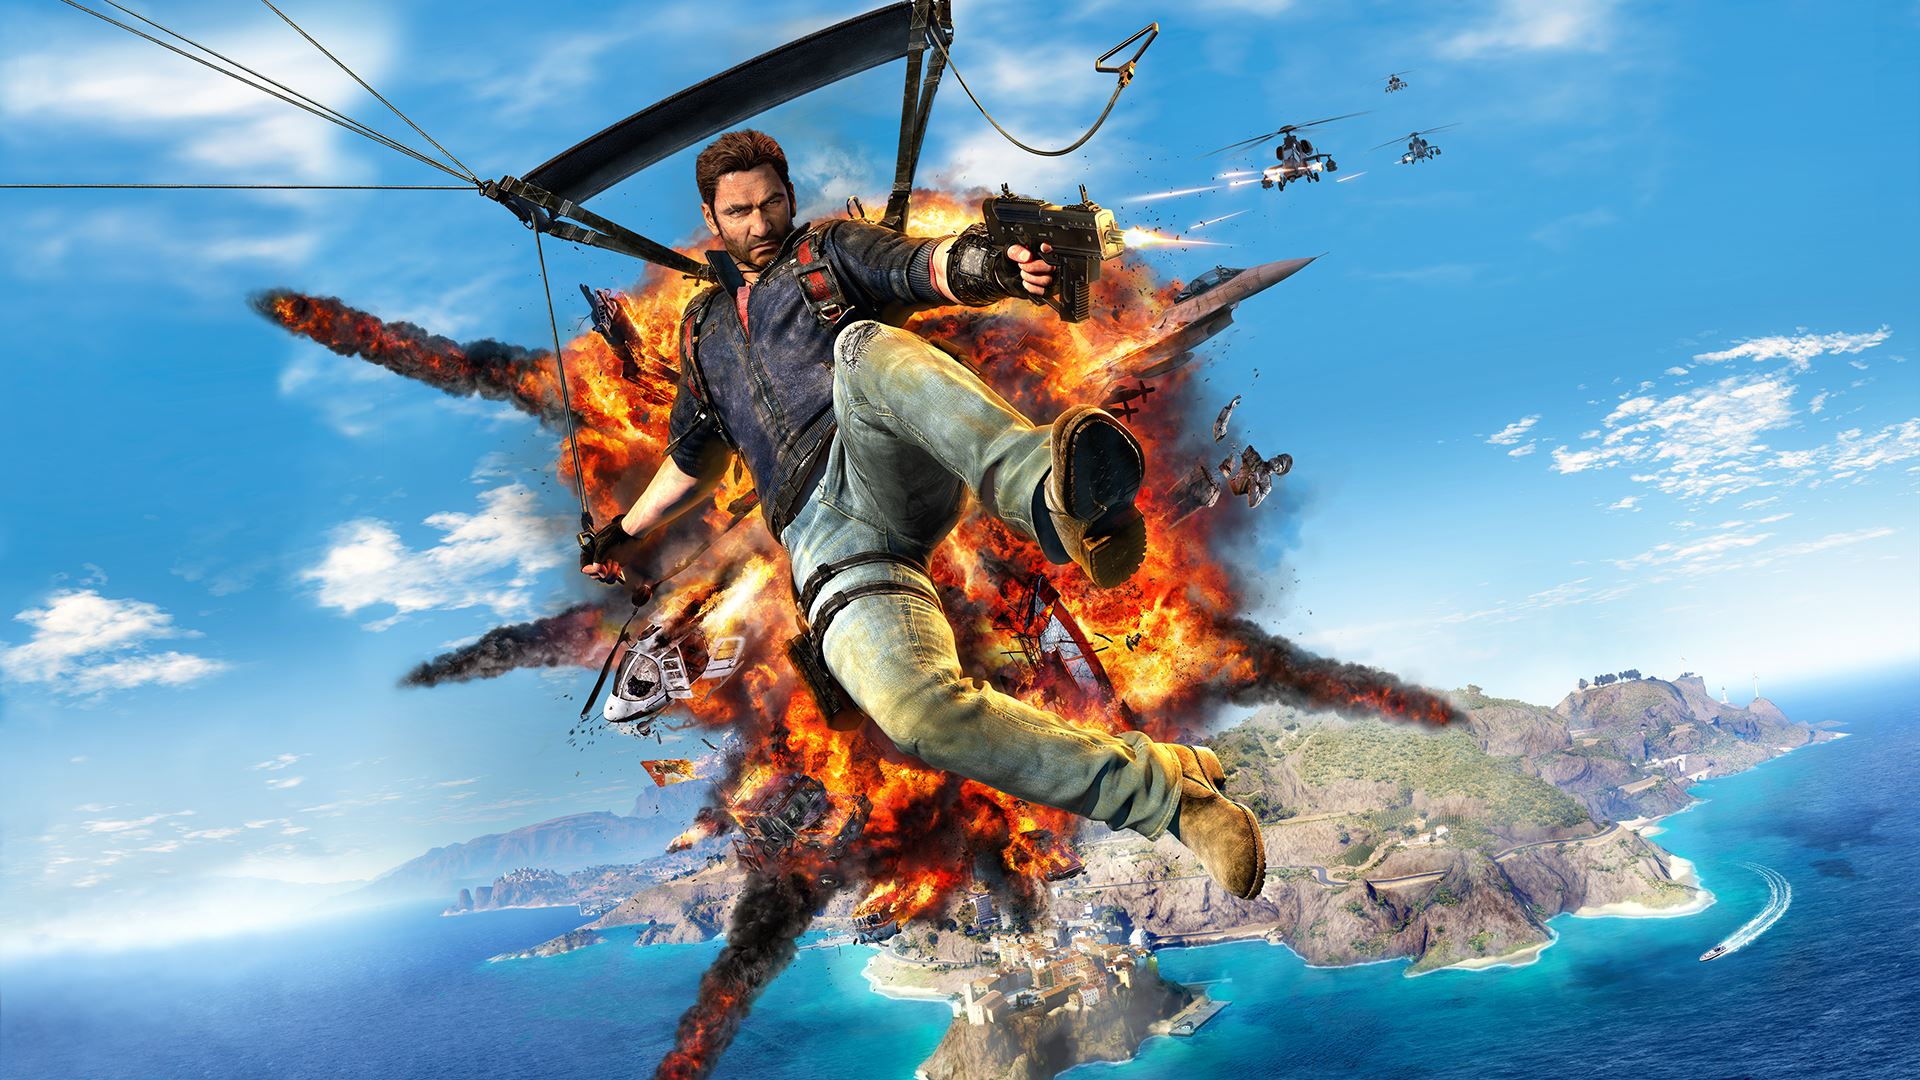 Just Cause 3 Wallpapers, Pictures, Images